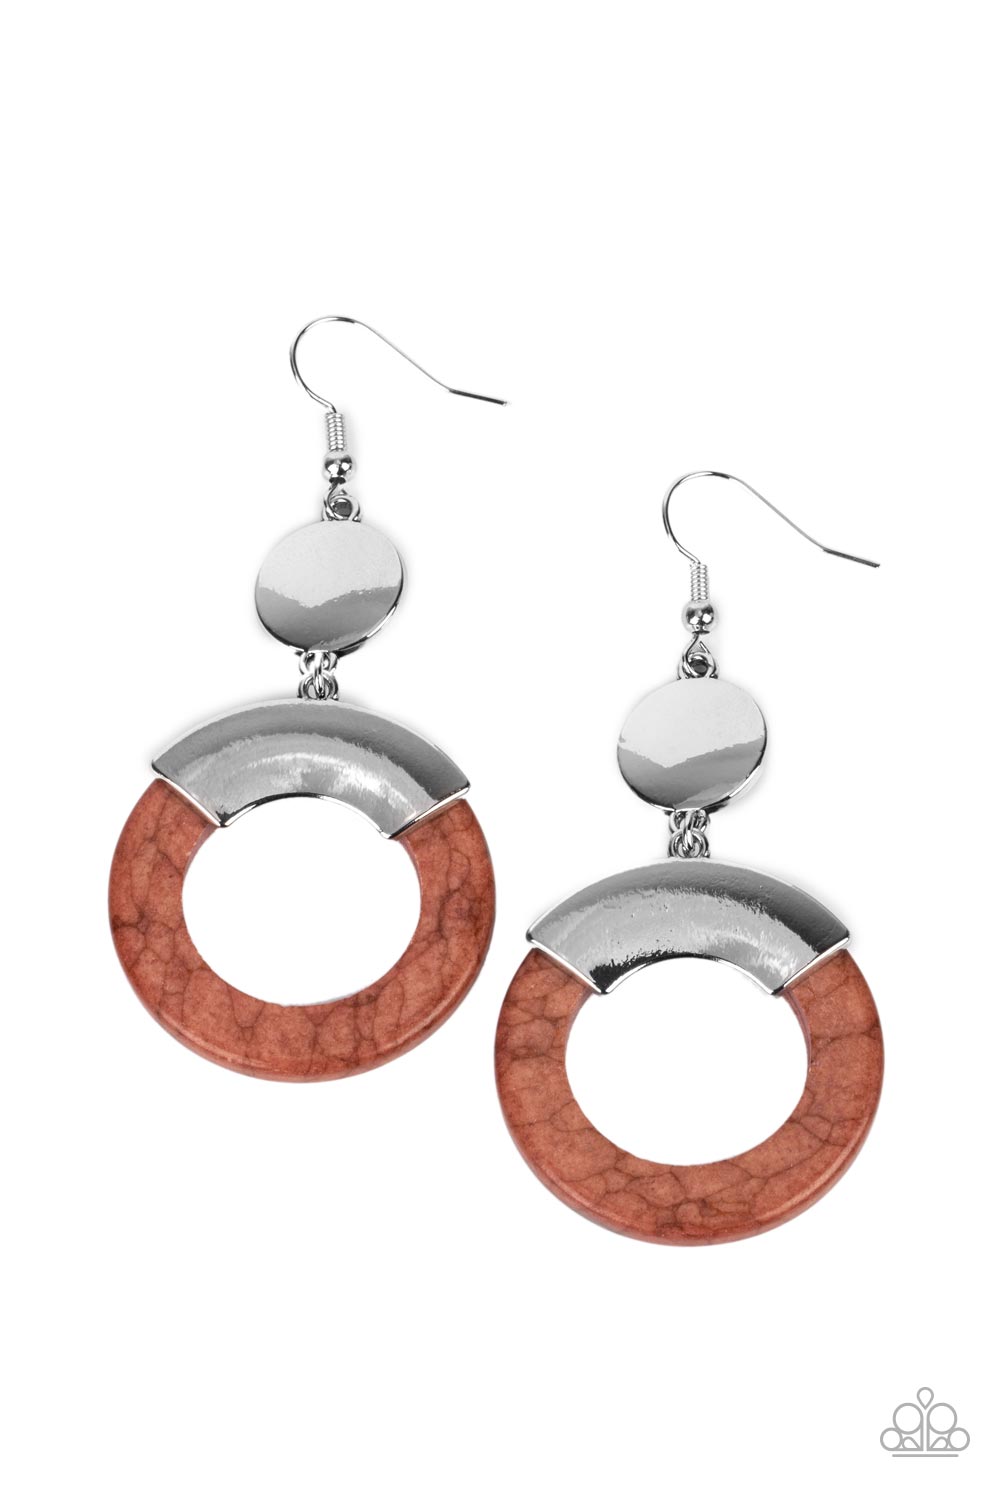 ENTRADA at Your Own Risk Brown Earring - Paparazzi Accessories  Capped in a curved silver plate, an earthy brown stone hoop swings from the bottom of a shiny silver disc for an authentic artisan twist. Earring attaches to a standard fishhook fitting.  Sold as one pair of earrings.